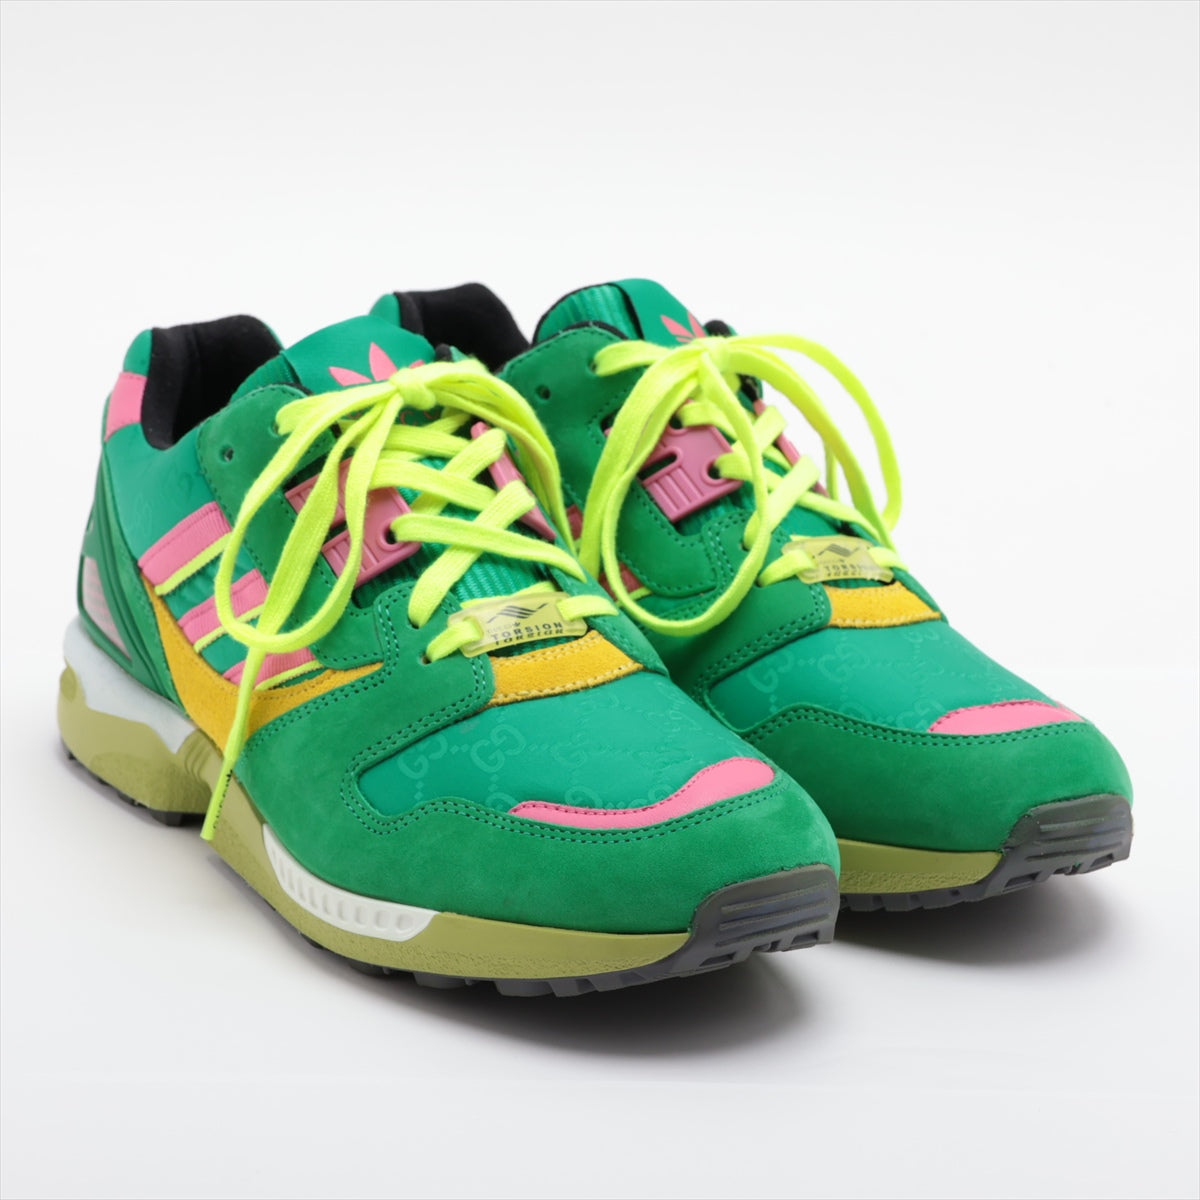 Gucci x adidas ZX8000 23SS Suede x canvas Sneakers 24.5cm Ladies' Multicolor 721937 TORSION GG Supreme Replaceable cord box There is a storage bag